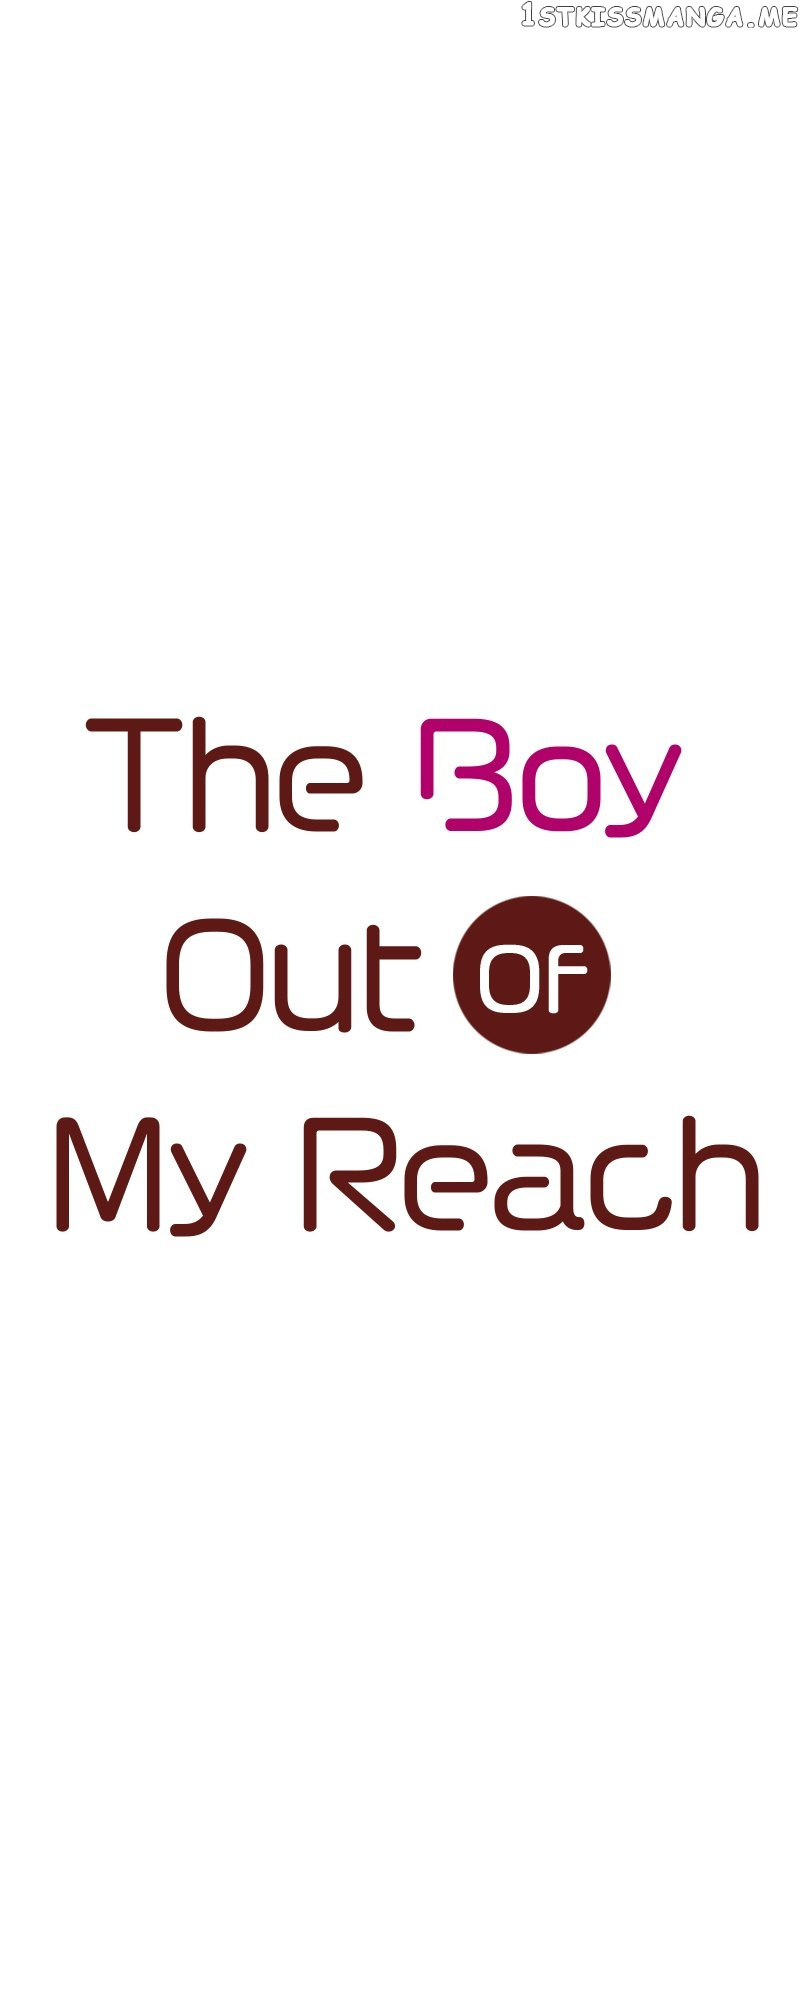 The Boy Out Of My Reach - Page 2